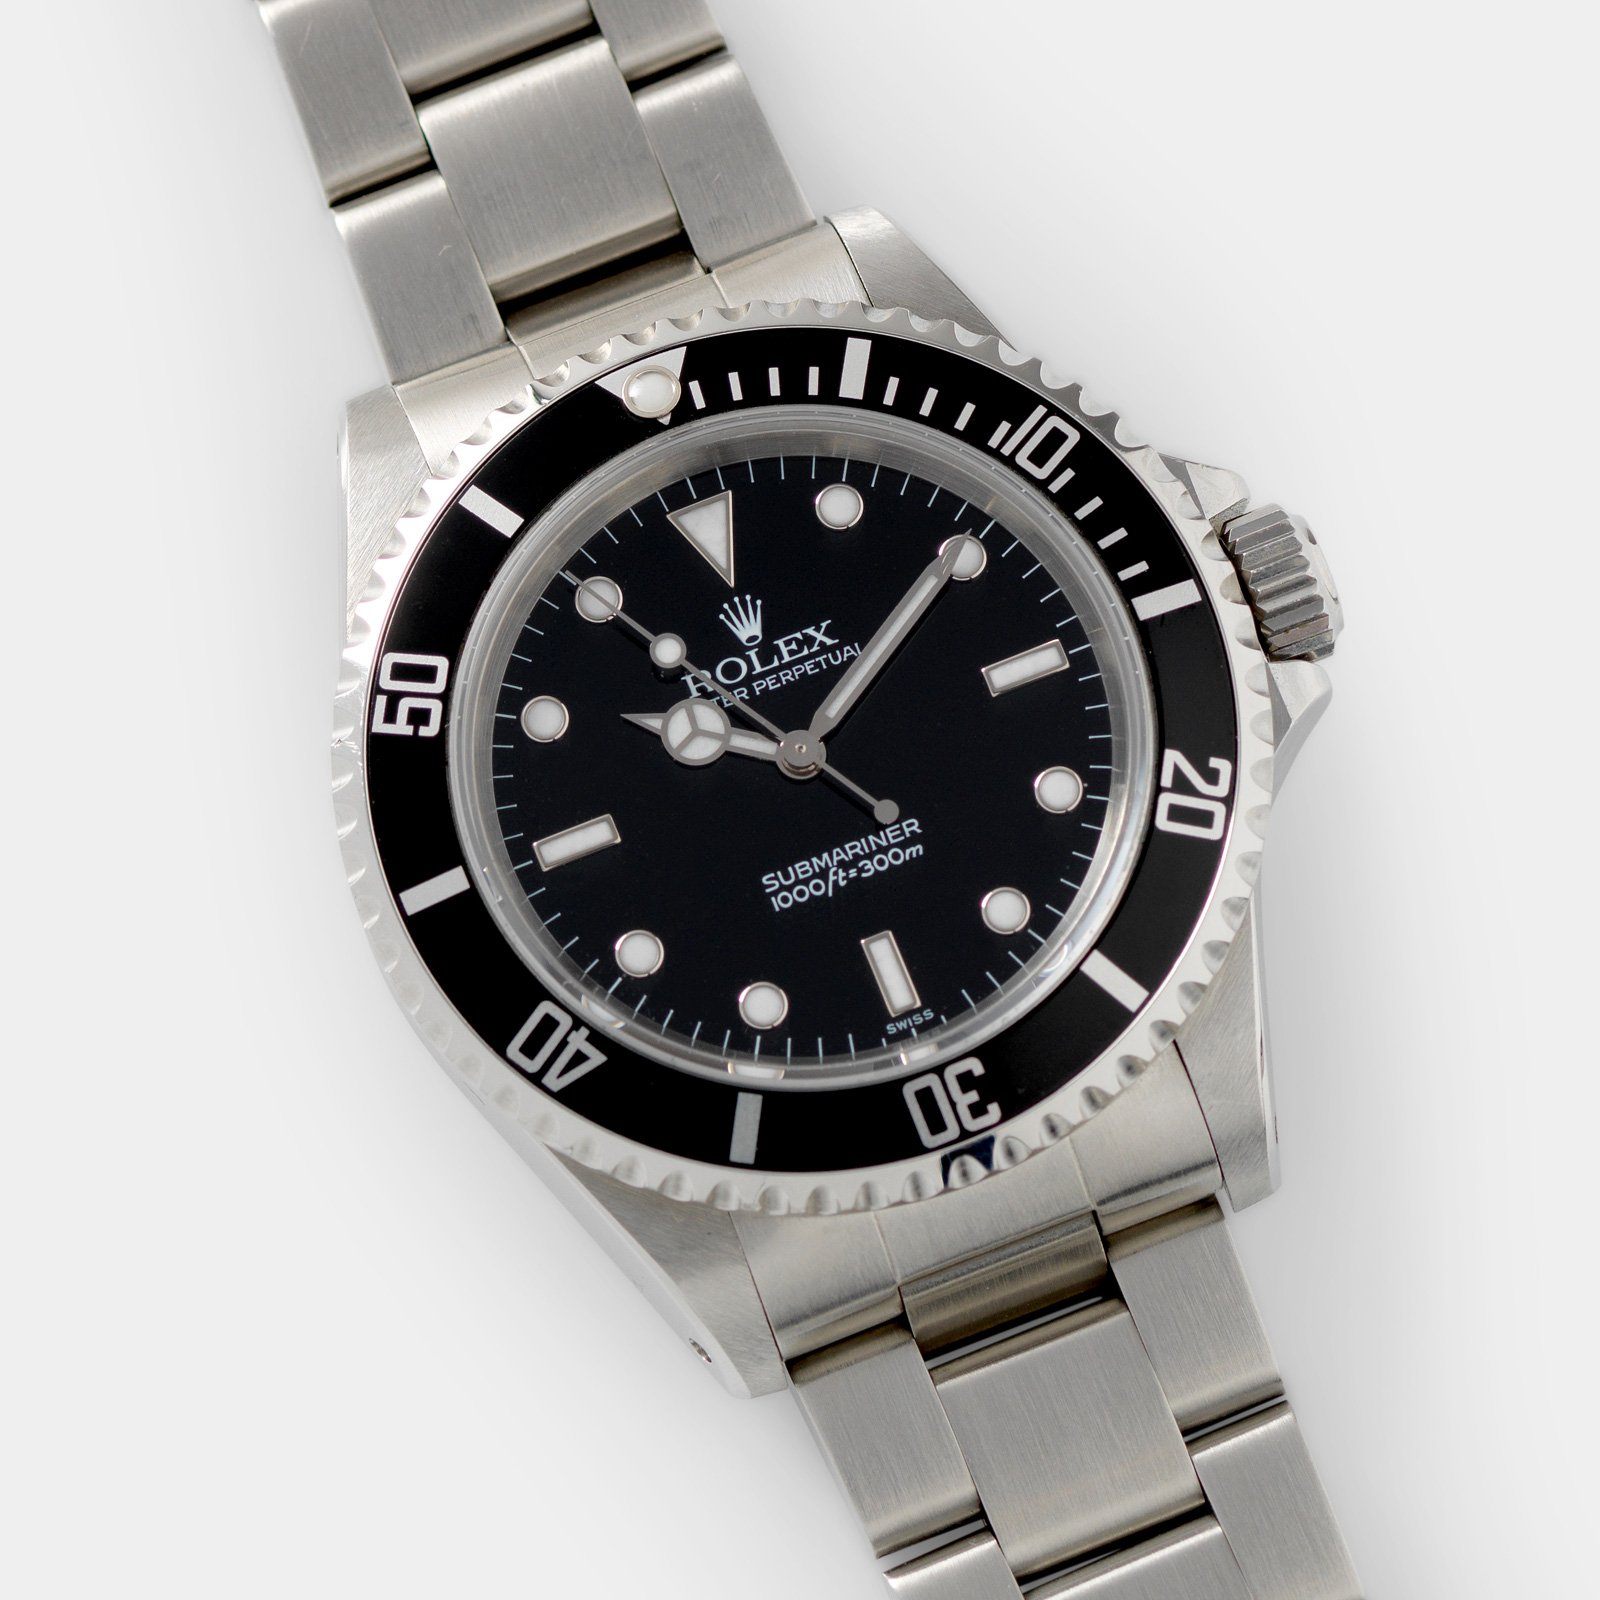 Rolex Submariner Swiss Only Dial Reference 14060 – Sons